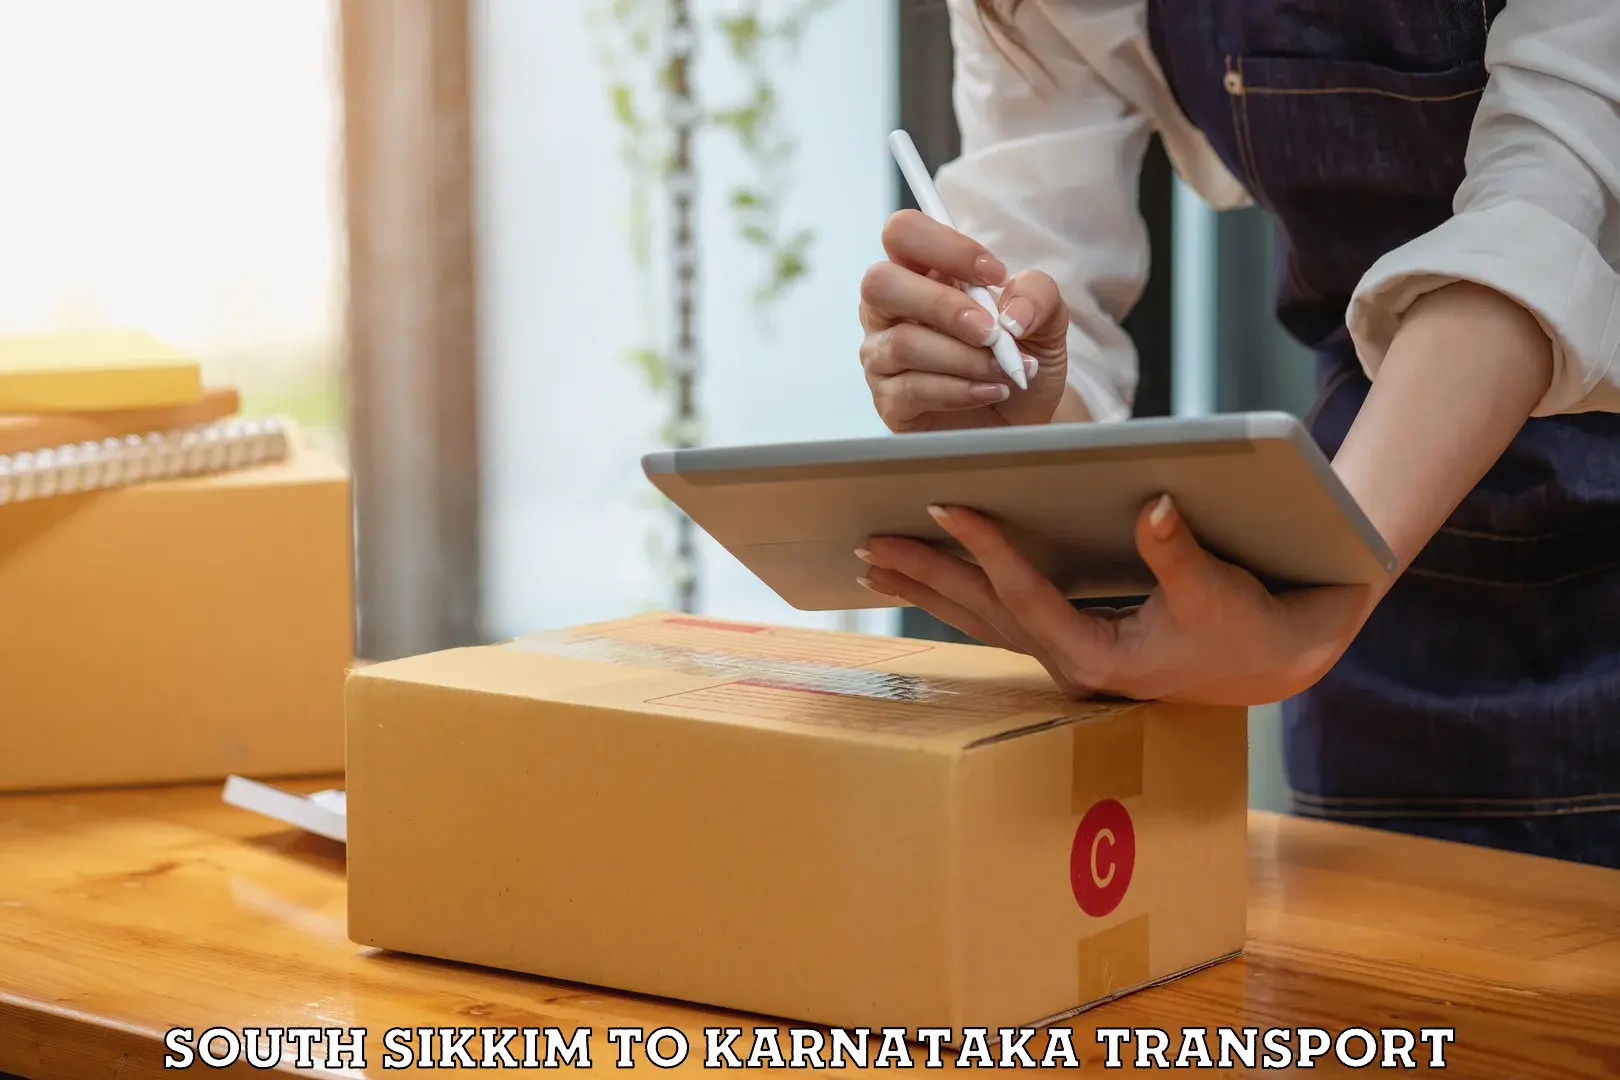 Two wheeler parcel service South Sikkim to Dharmasthala